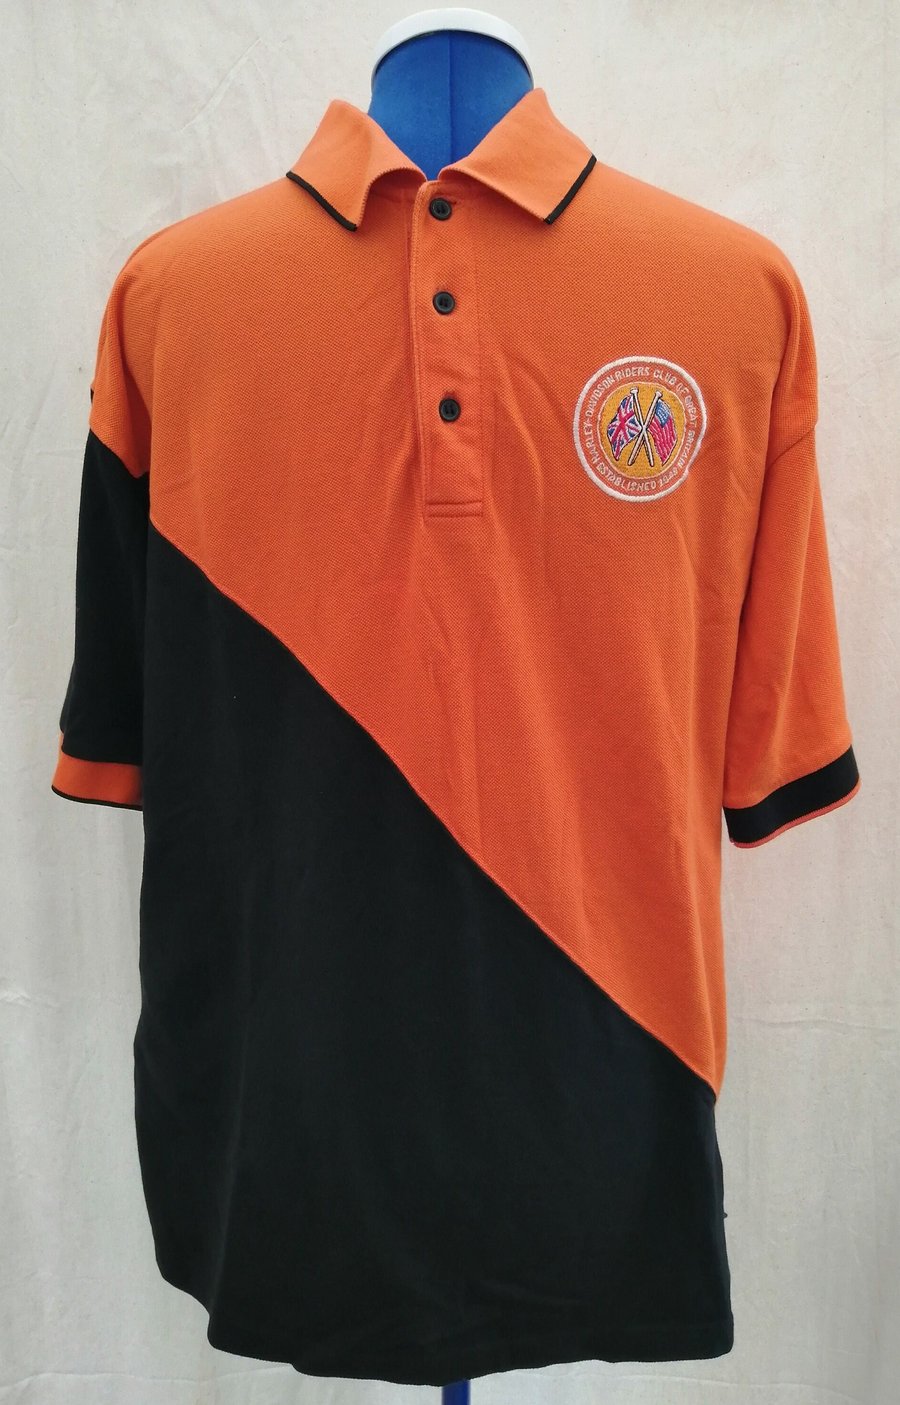 Vintage 1990's Harley Davidson - 'Riders Club of Great Britain' Polo Shirt size 